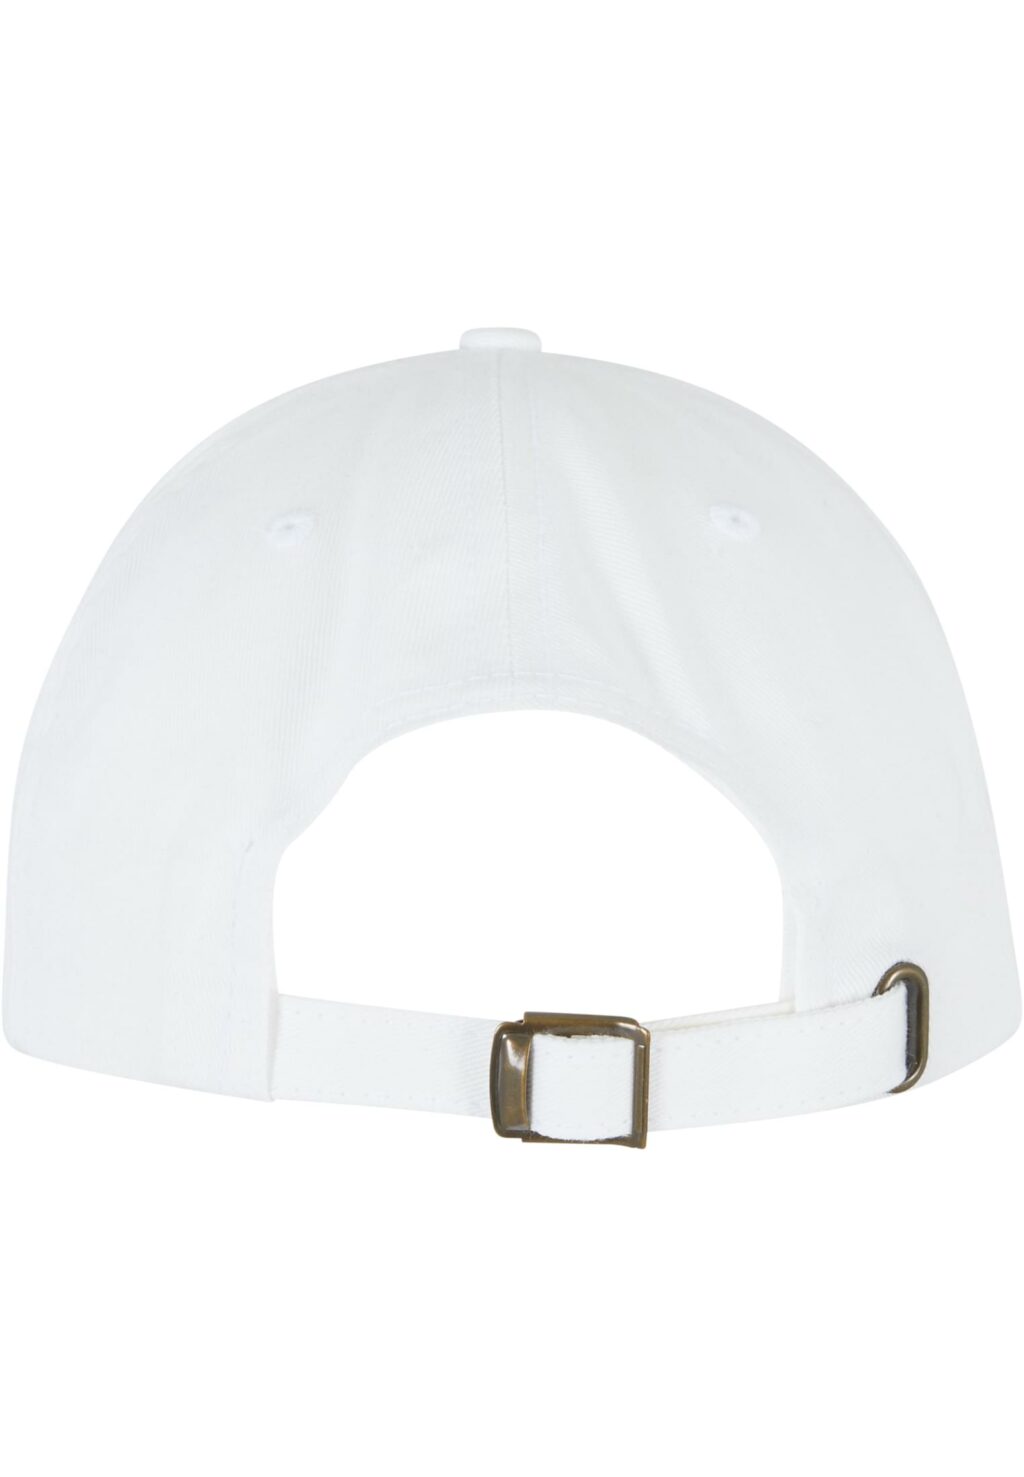 Baby Girl Dad Cap white one MST015